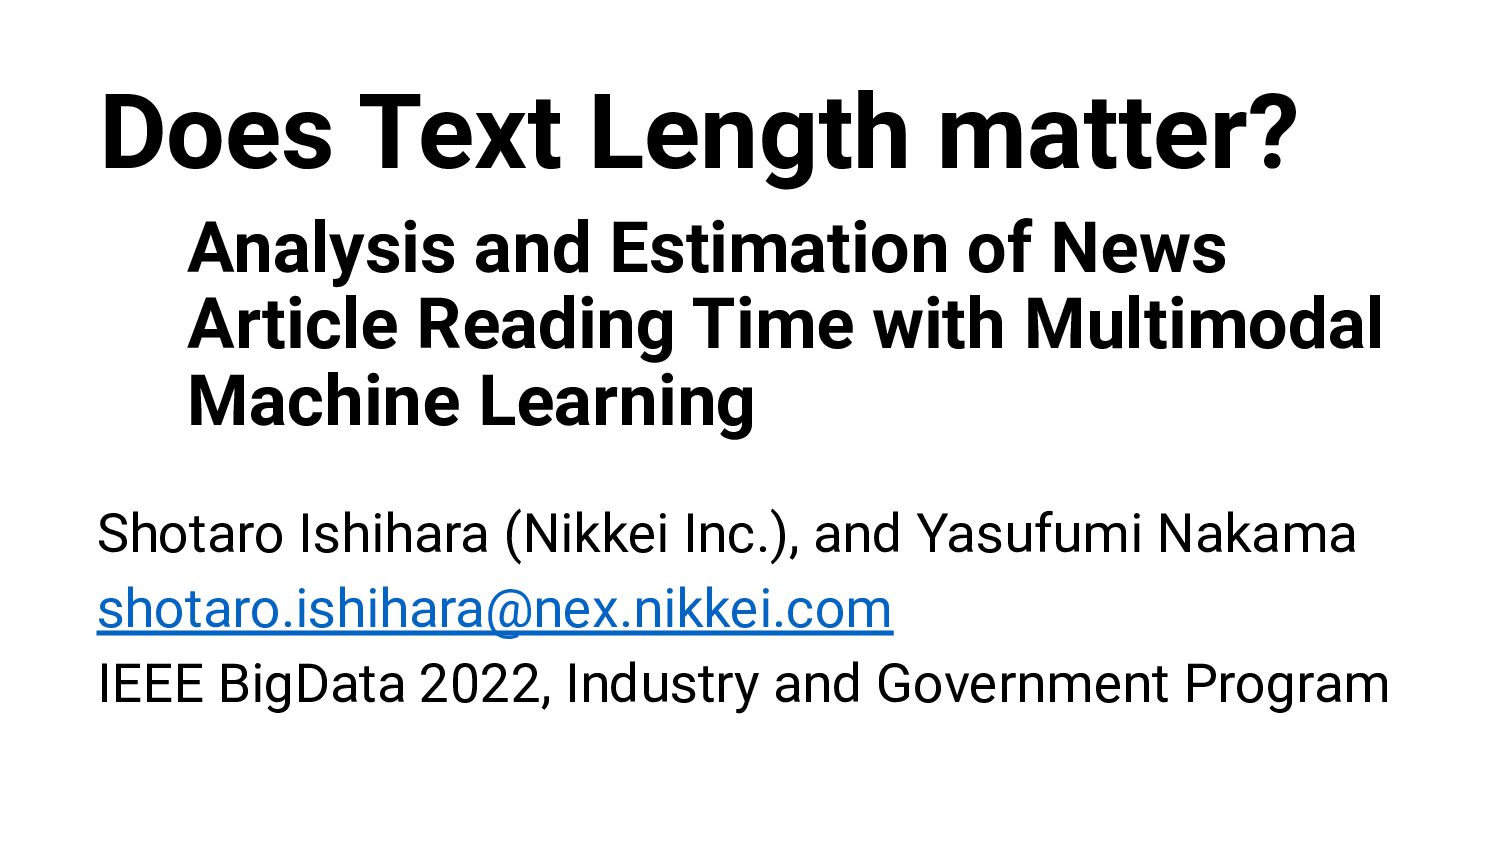 Analysis and Estimation of News Article Reading Time with Multimodal Machine Learning